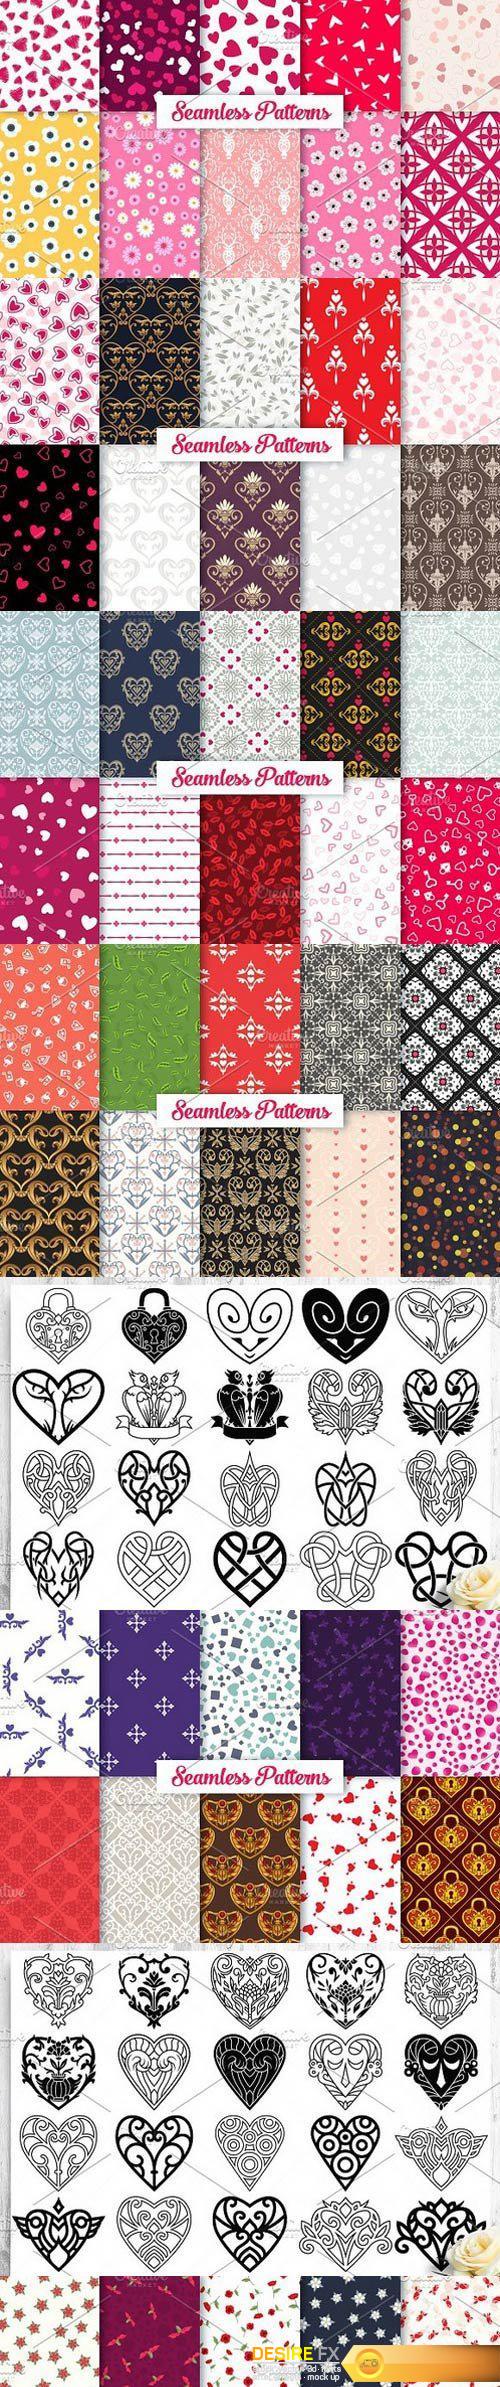 CM - Heart Vector Ornaments and Patterns 1278561